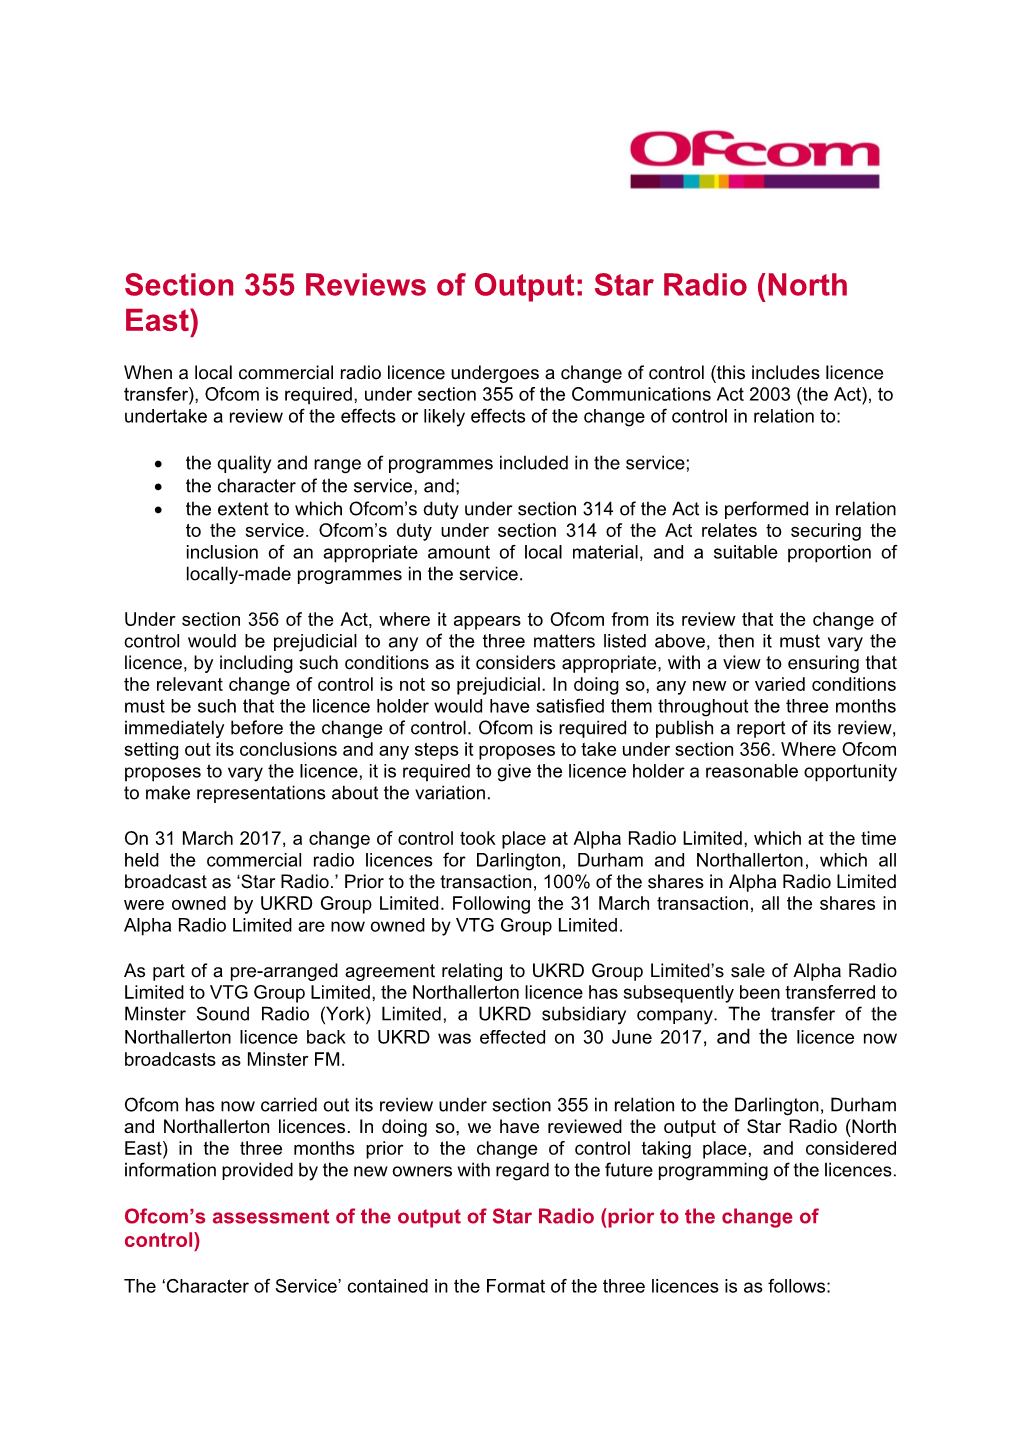 Section 335 Reviews of Output: Star Radio (North East)